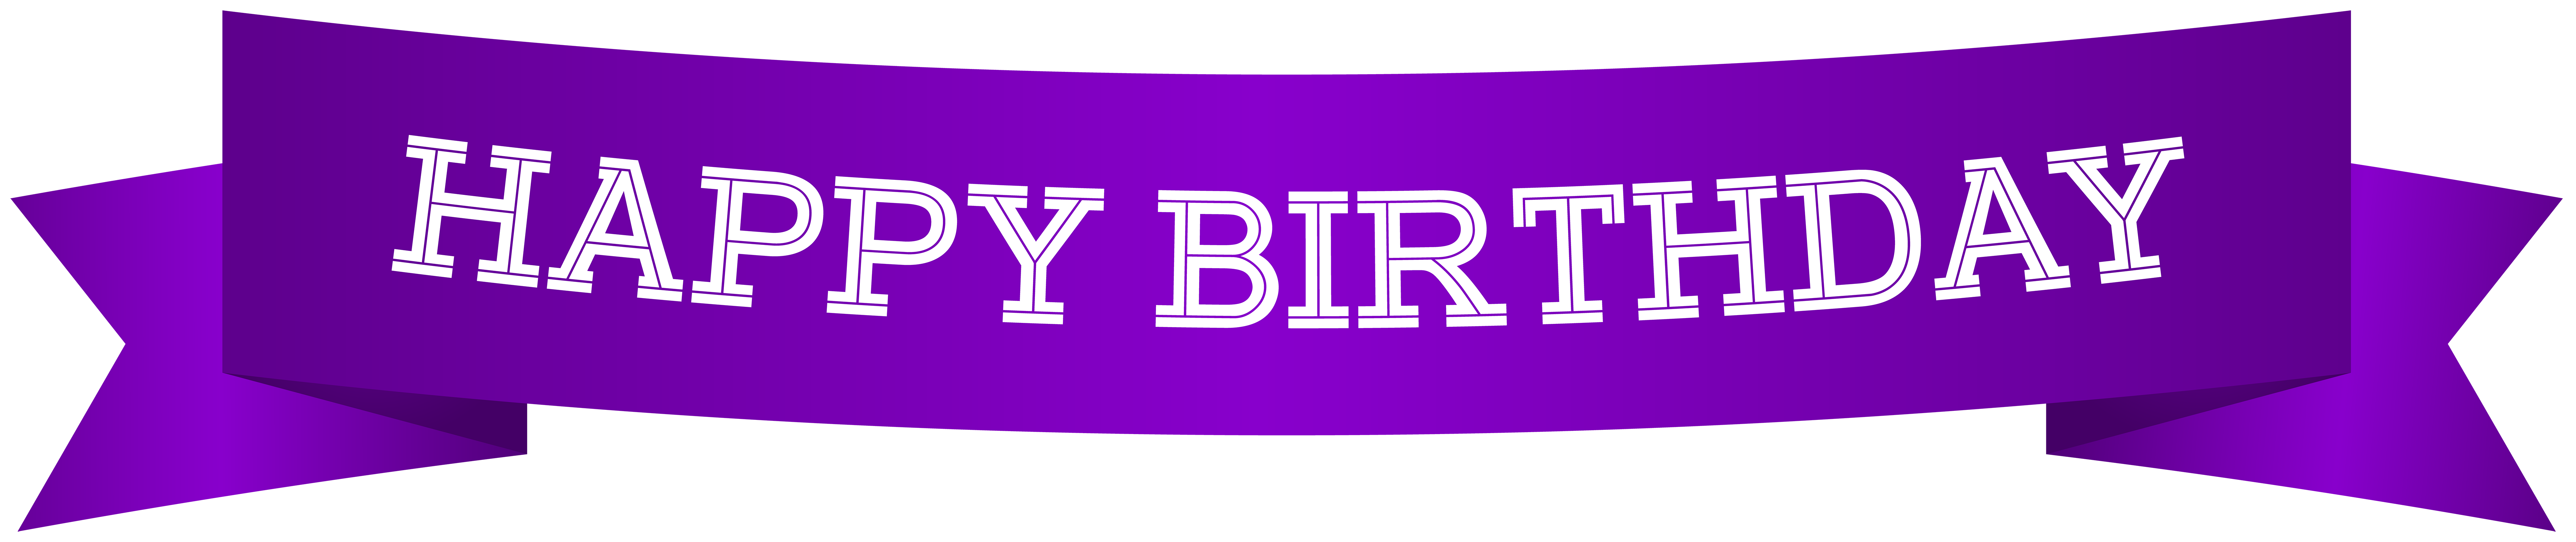 happy-birthday-banner-purple-png-clip-art-image-gallery-yopriceville-high-quality-free